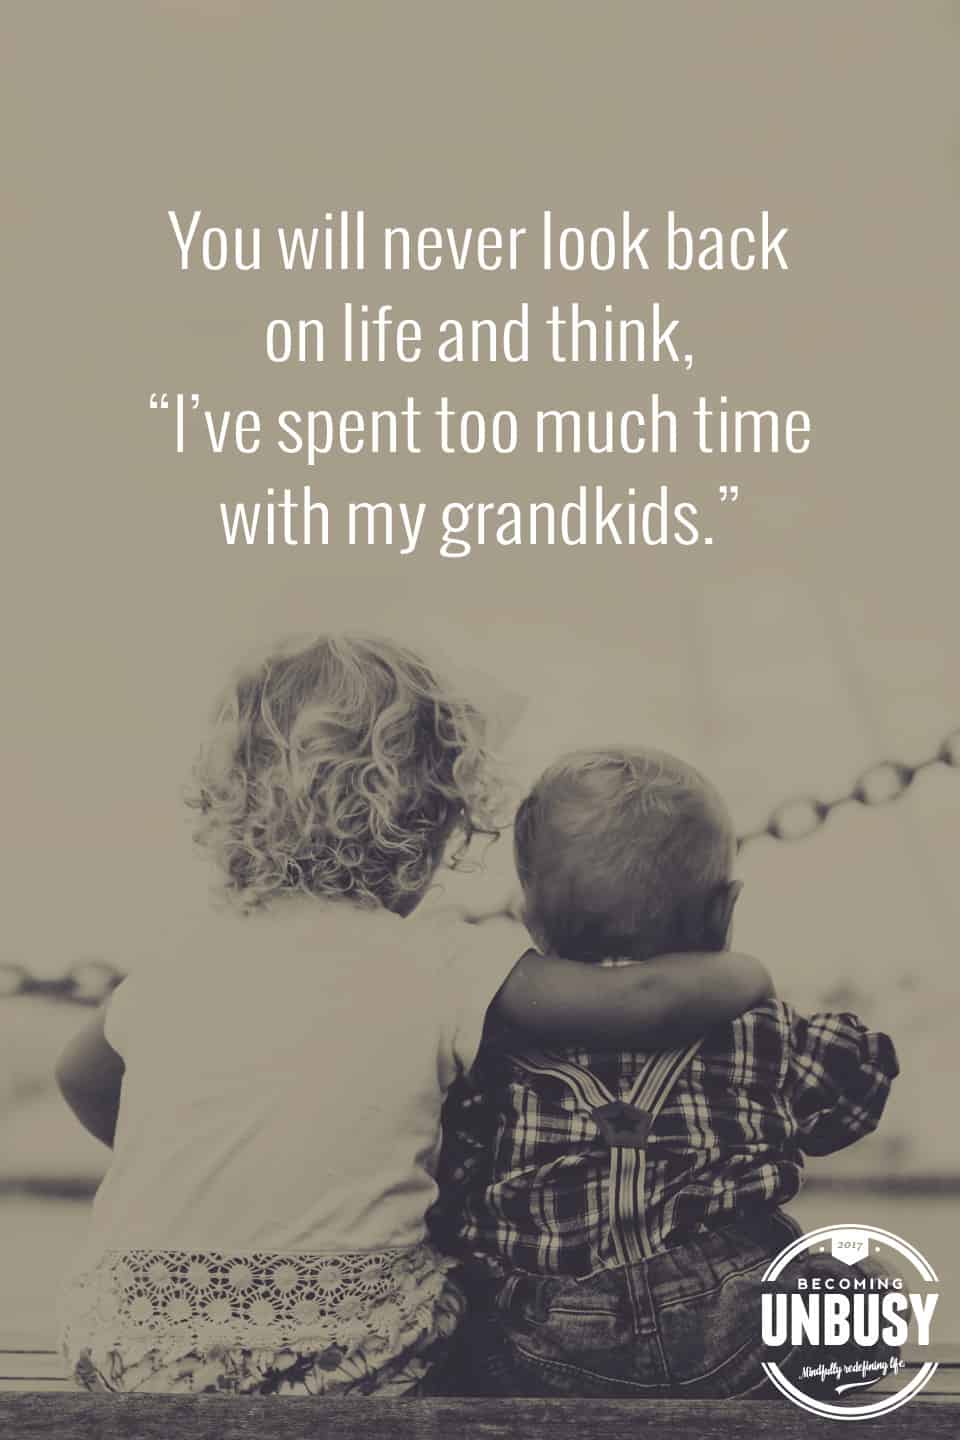 Two little kids sitting shoulder to shoulder with this quote above, "You will never look back on life and think, "I've spent too much time with my grandkids."You will never look back on life and think, "I've spent too much time with my grandkids."You will never look back on life and think, "I've spent too much time with my grandkids."You will never look back on life and think, 'I've spent too much time with my grandkids.'"